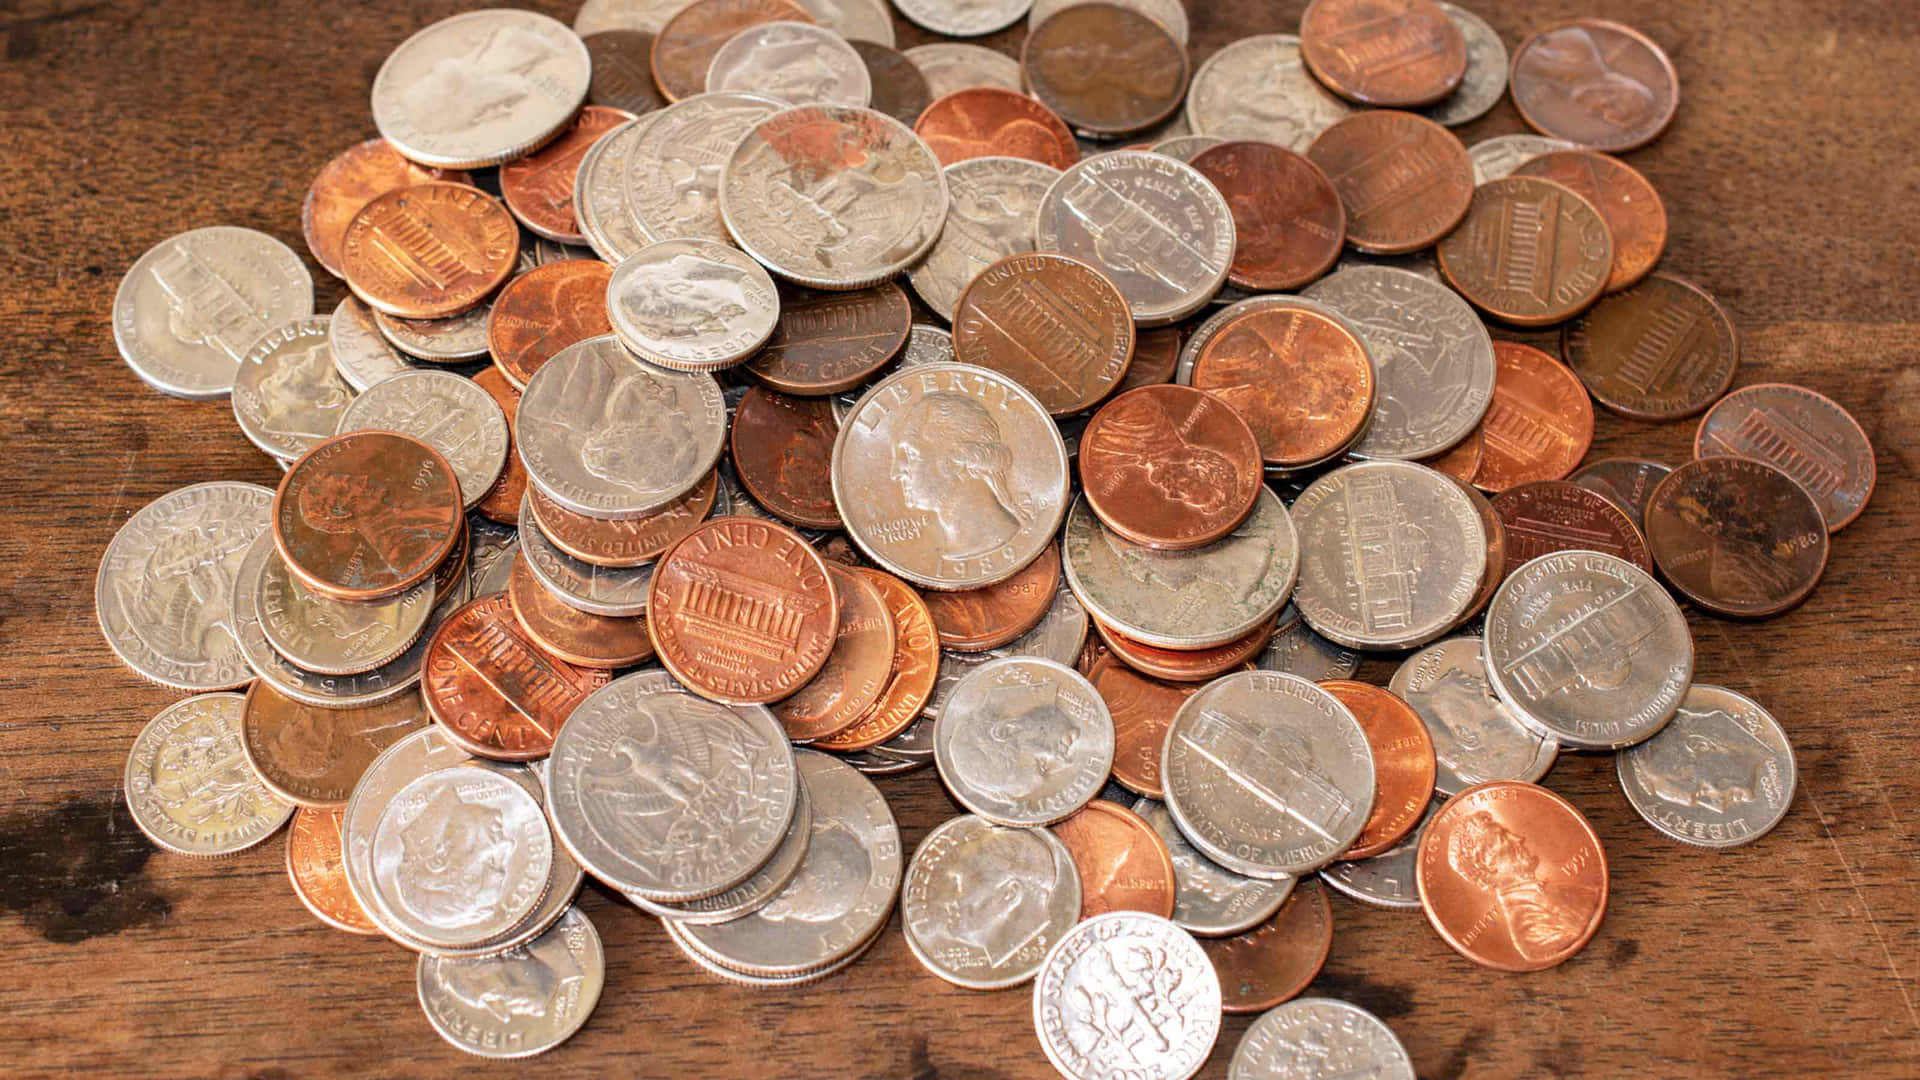 A Pile Of Coins On A Wooden Table